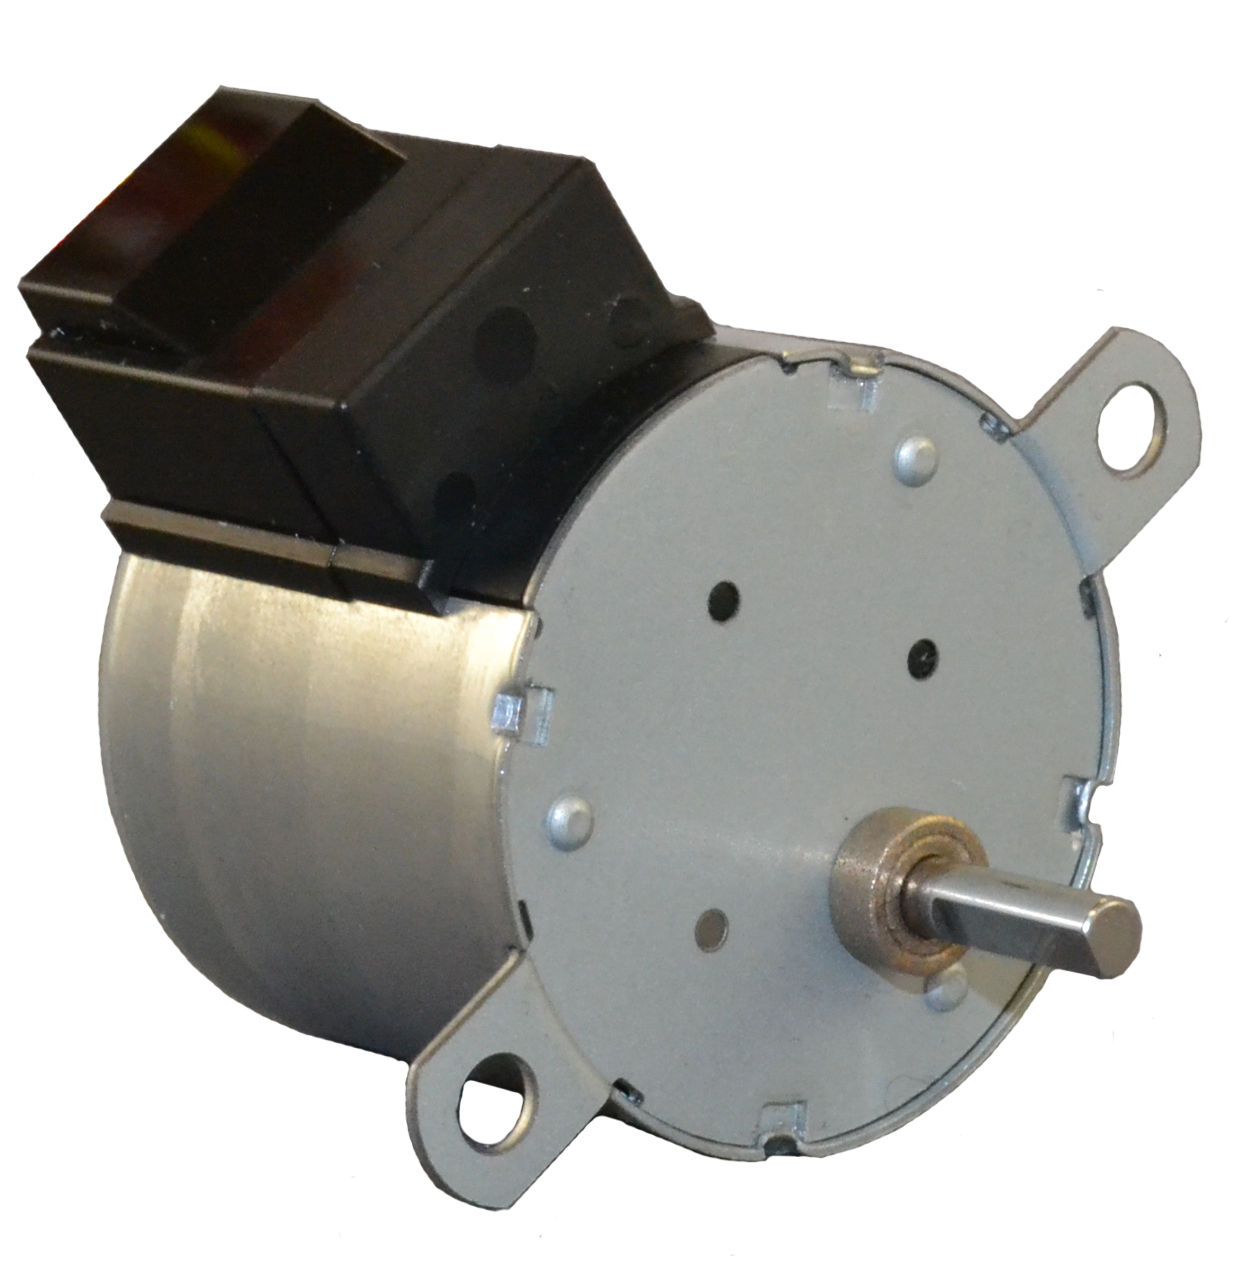 Nippon Pulse 30mm rotary tin-can stepper motor with connector